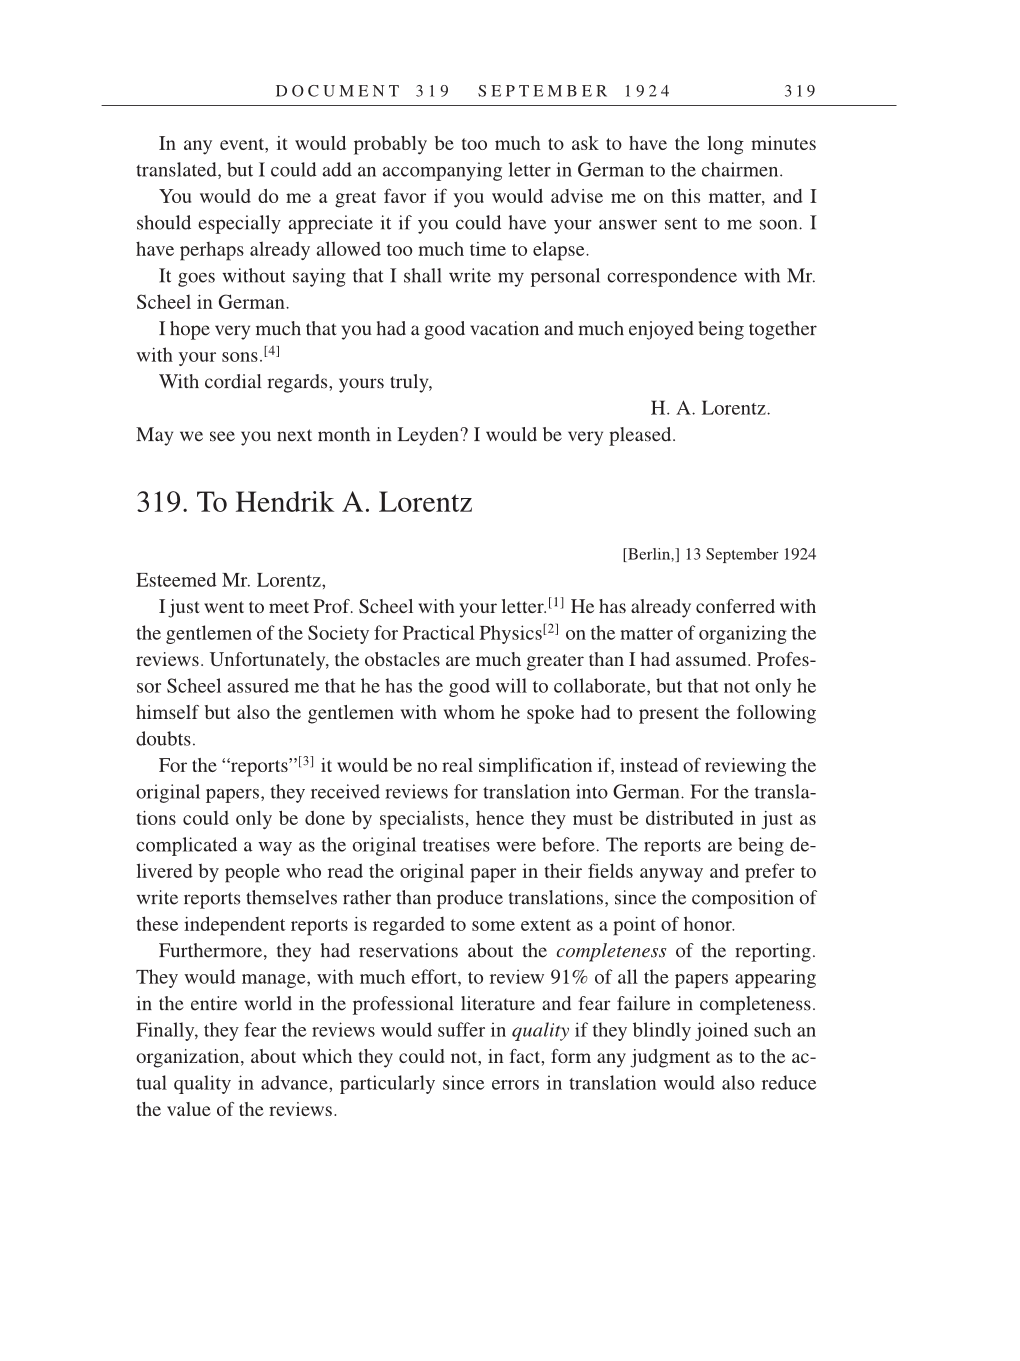 Volume 14: The Berlin Years: Writings & Correspondence, April 1923-May 1925 (English Translation Supplement) page 319